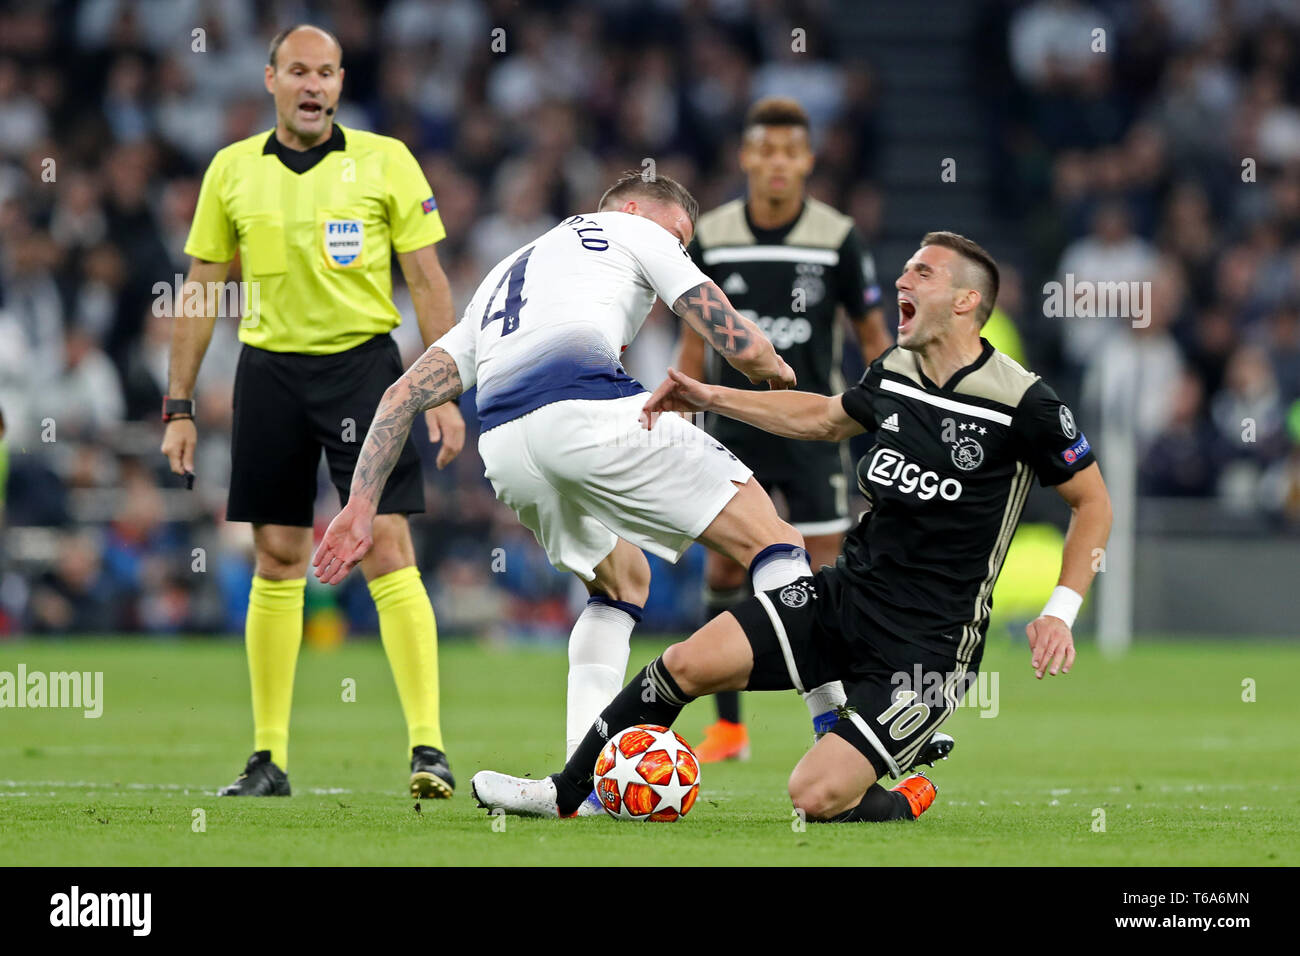 London, UK. 30th Apr 2019. Ajax forward Dusan Tadic is tackled by Tottenham defender Toby Alderweireld during the UEFA Champions League match between Tottenham Hotspur and Ajax Amsterdam at White Hart Lane, London on Tuesday 30th April 2019. (Credit: Jon Bromley | MI News) Credit: MI News & Sport /Alamy Live News Stock Photo